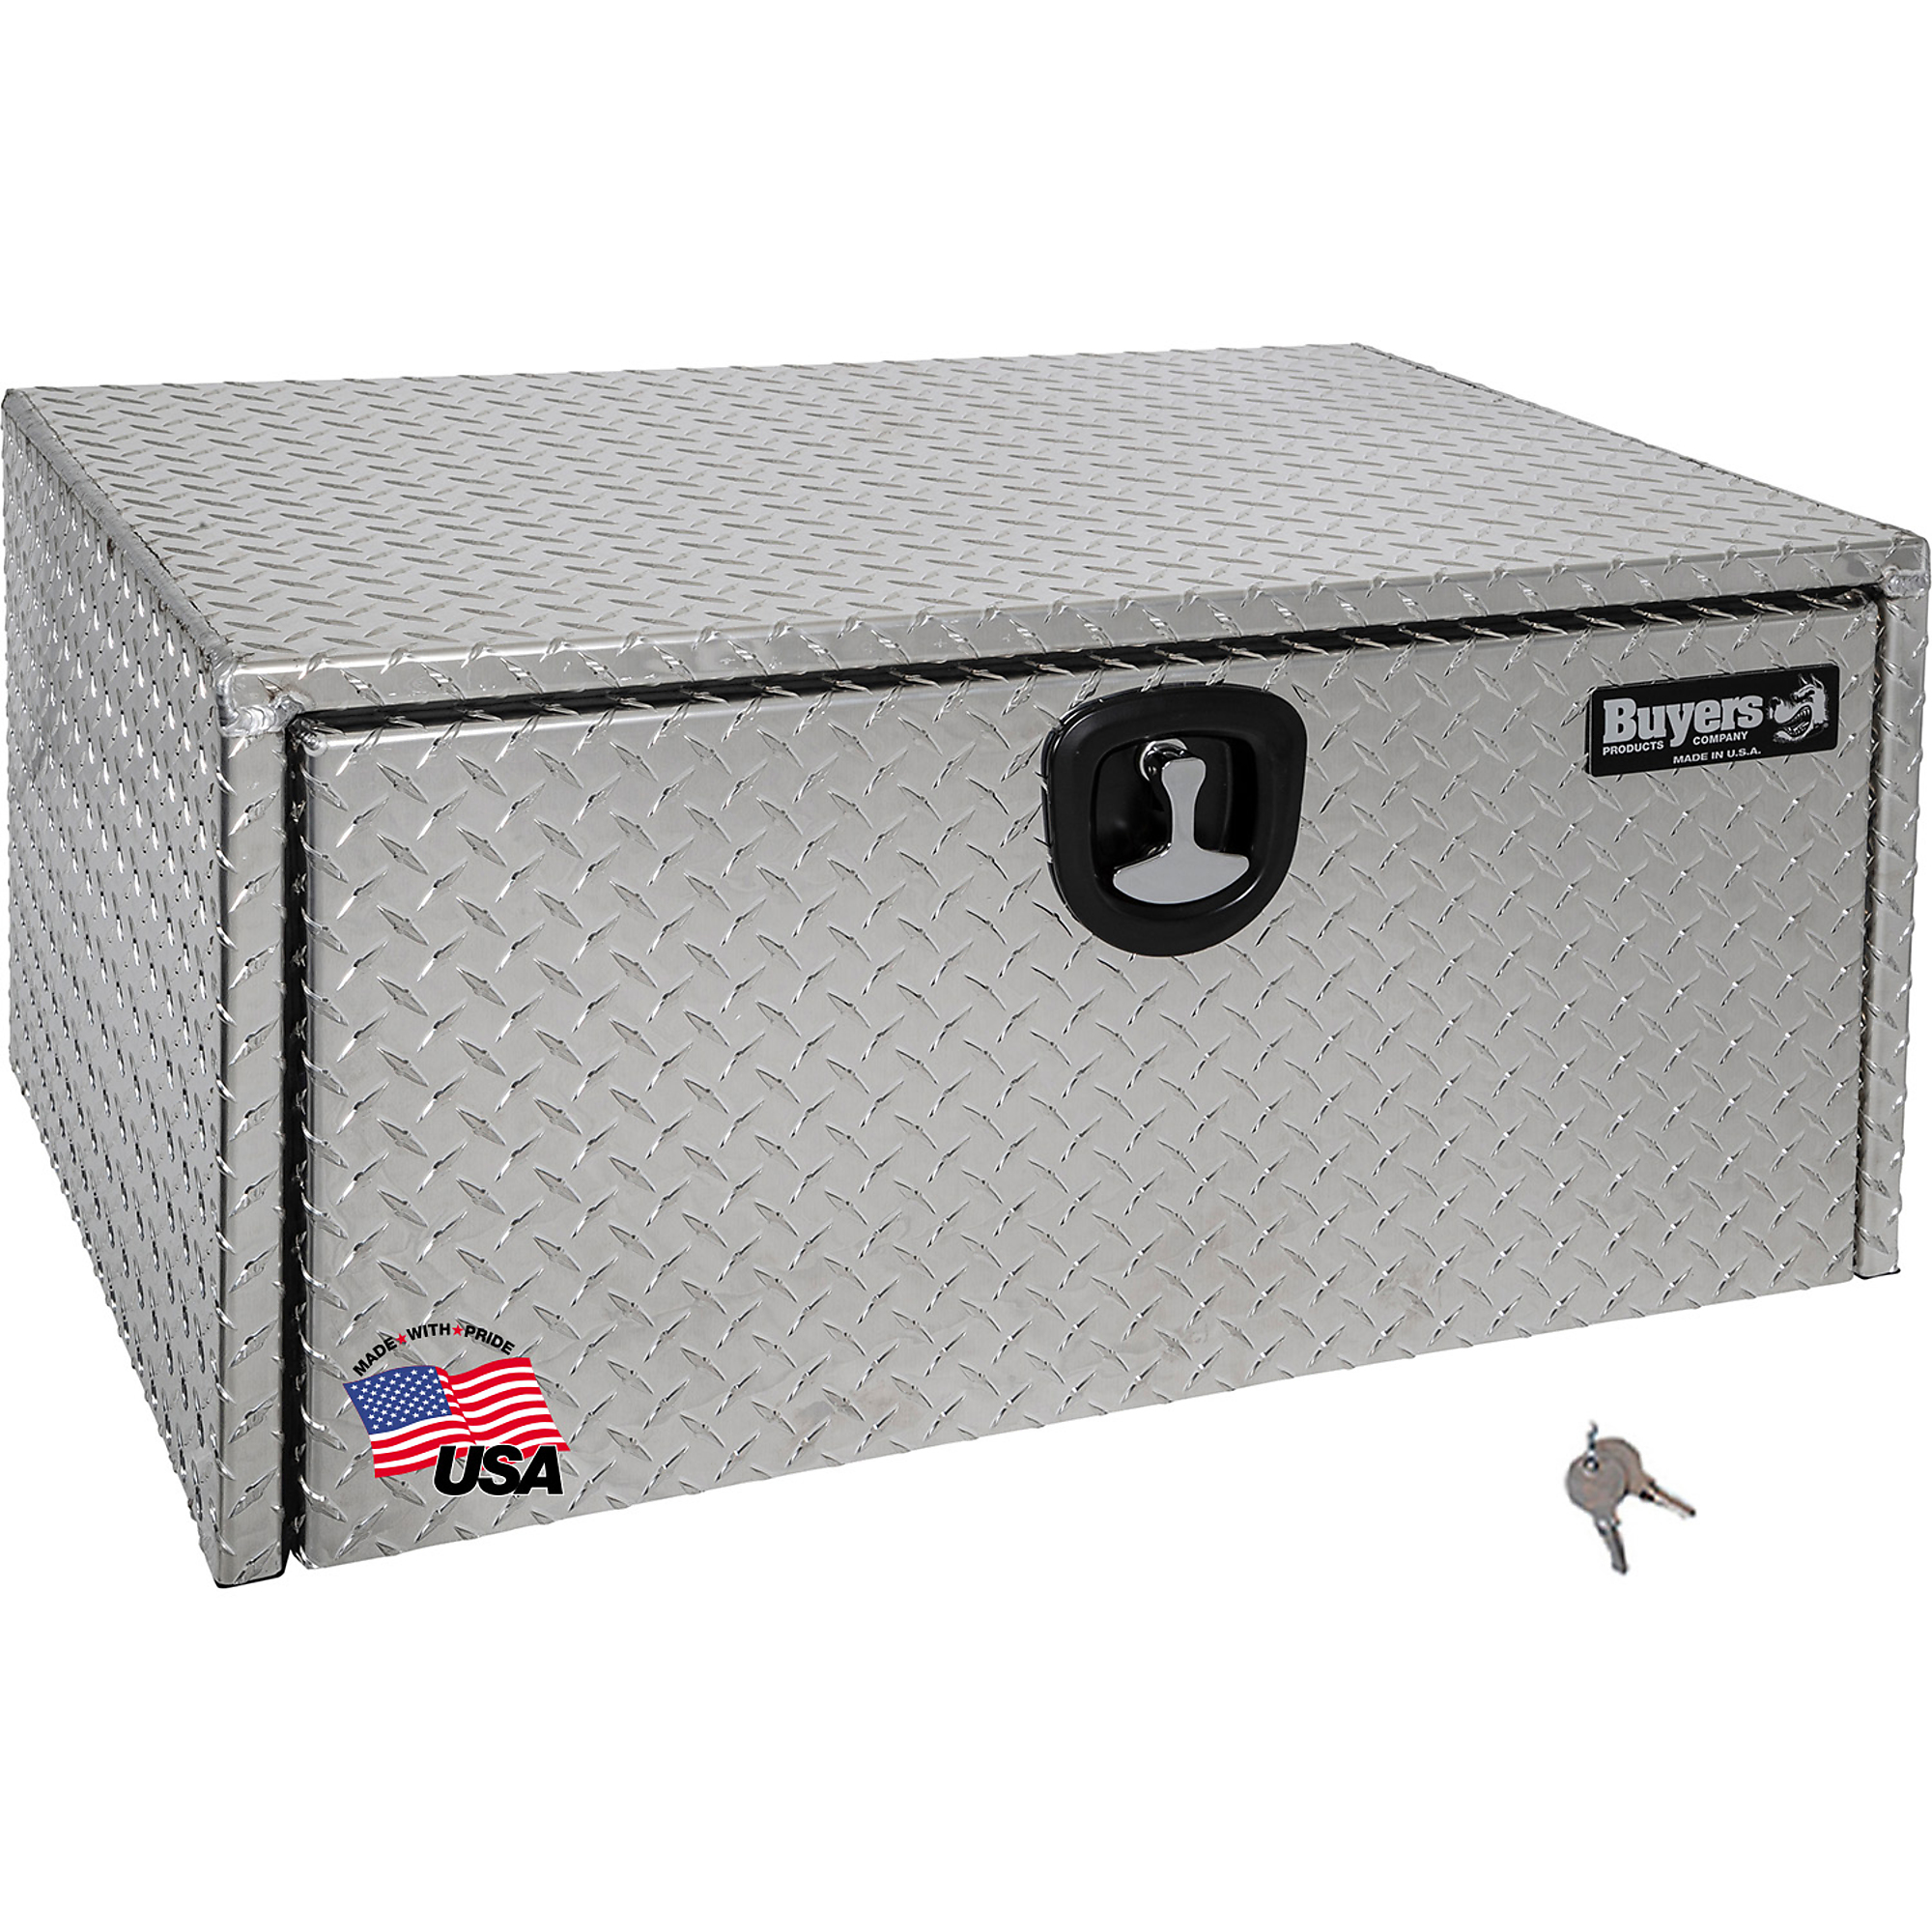 Buyers Products, 36x24x18Inch Aluminum Underbody Truck Tool Job Storage Box, Width 24 in, Material Aluminum, Color Finish Diamond Plate Silver, Model